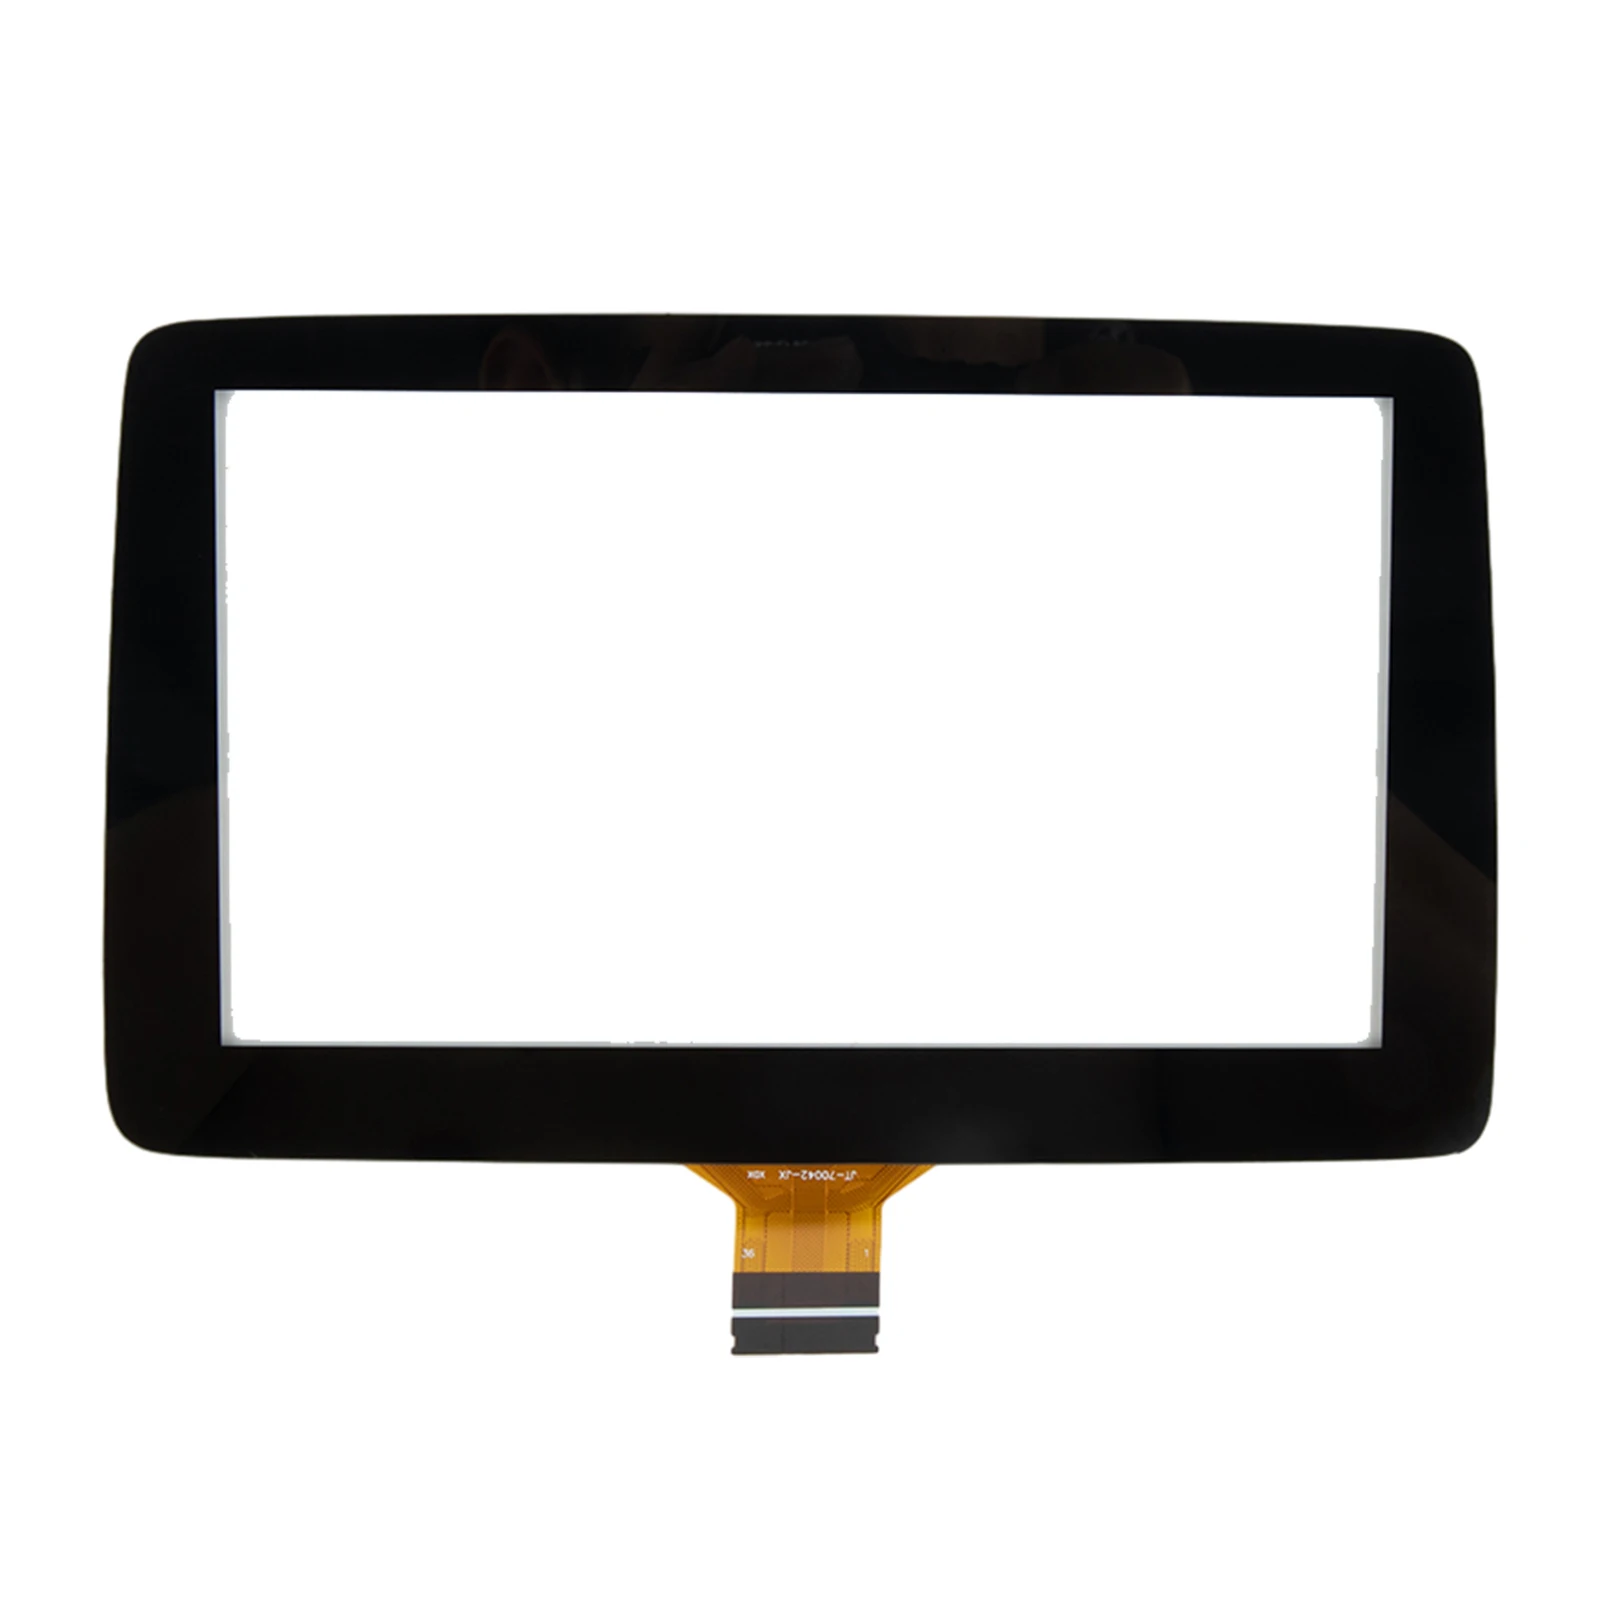 

7inch Car Touch Screen Glass For Mazda 3 2014-2016 Information Display BHP1611J0D Touch Screen Glass Digitizer Accessories